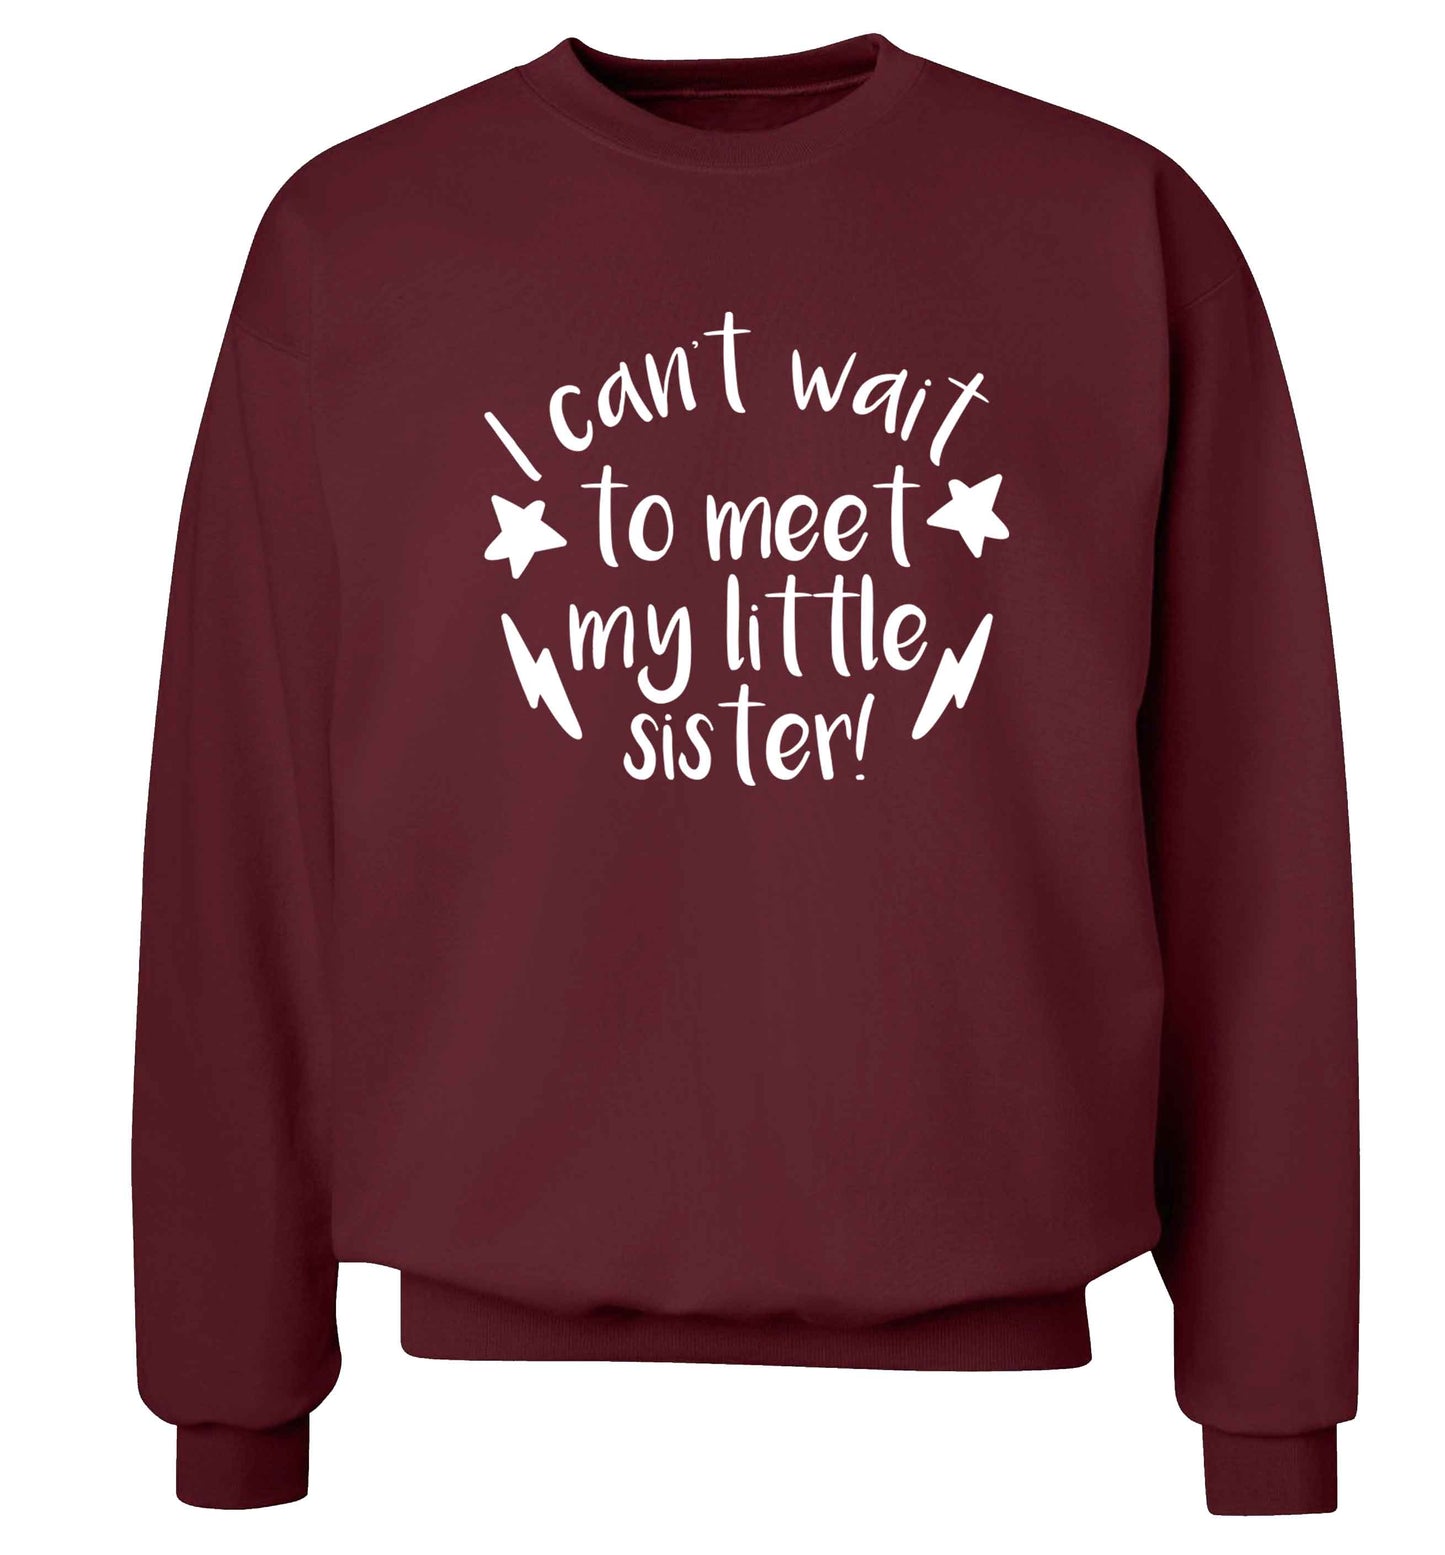 Something special growing inside it's my little sister I can't wait to say hi! Adult's unisex maroon Sweater 2XL